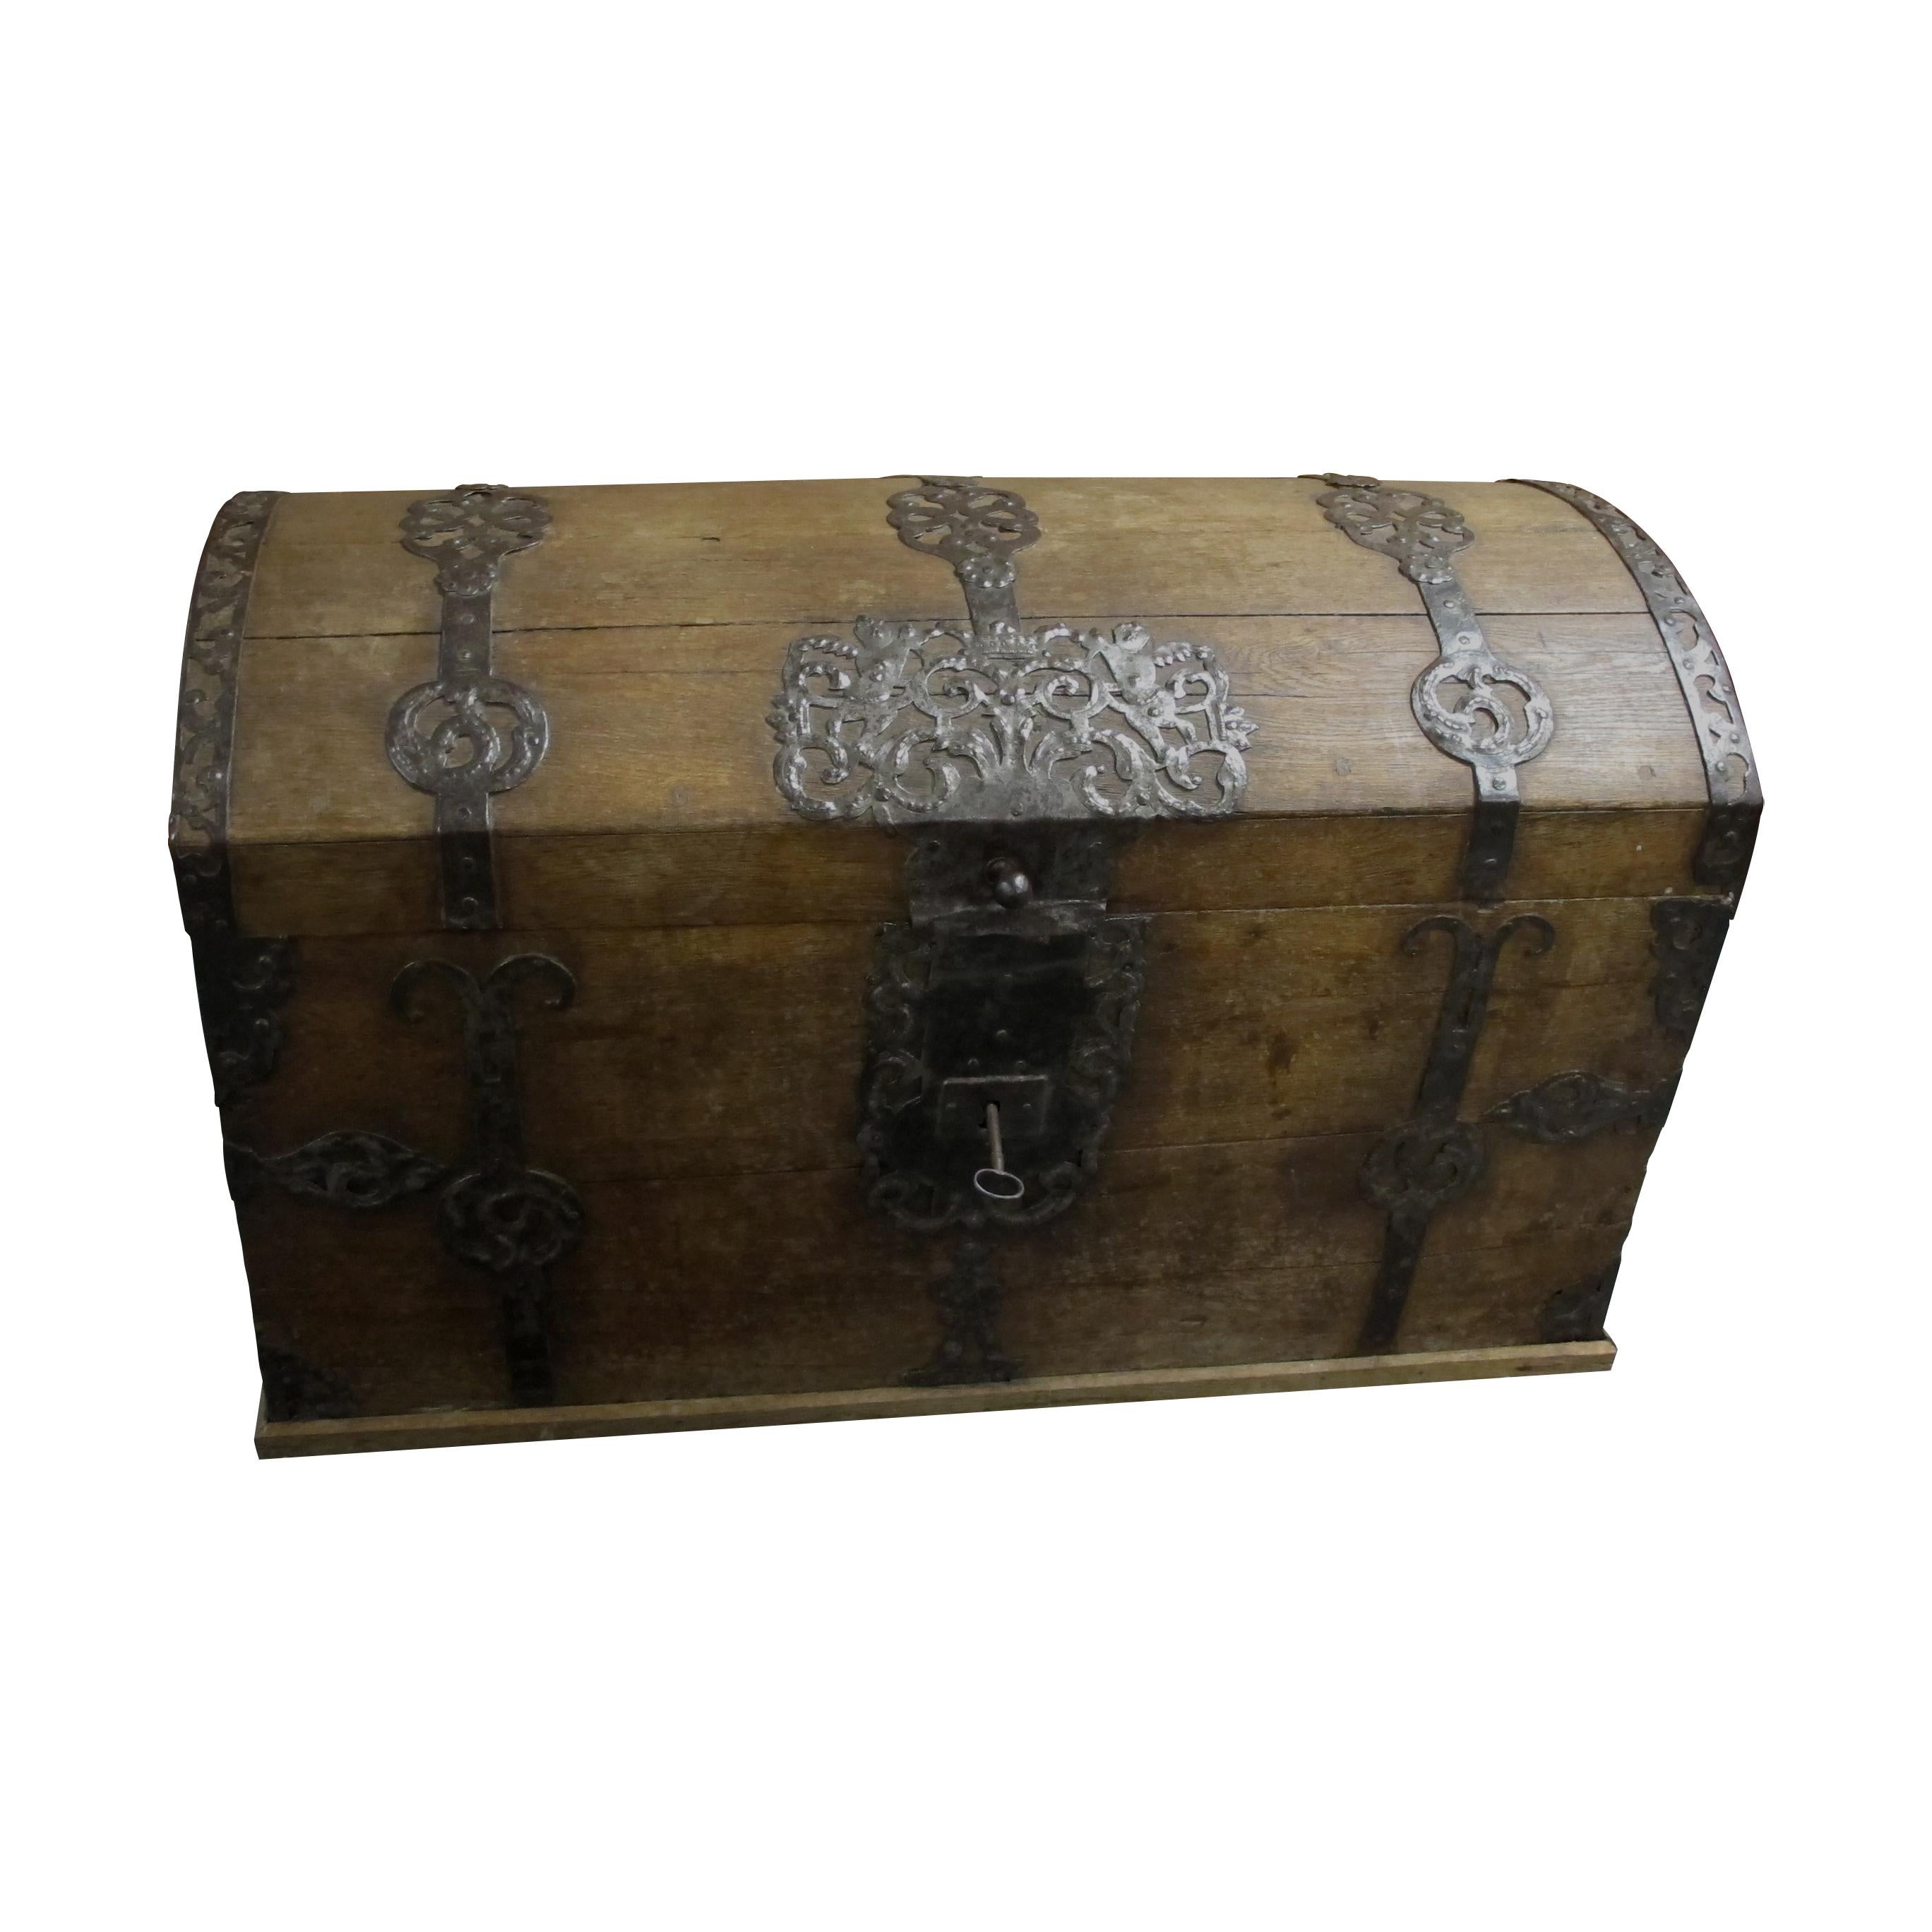 Baroque Antique 18th Century Trunk-Coffer with Dome Top and Ornate Metal Work